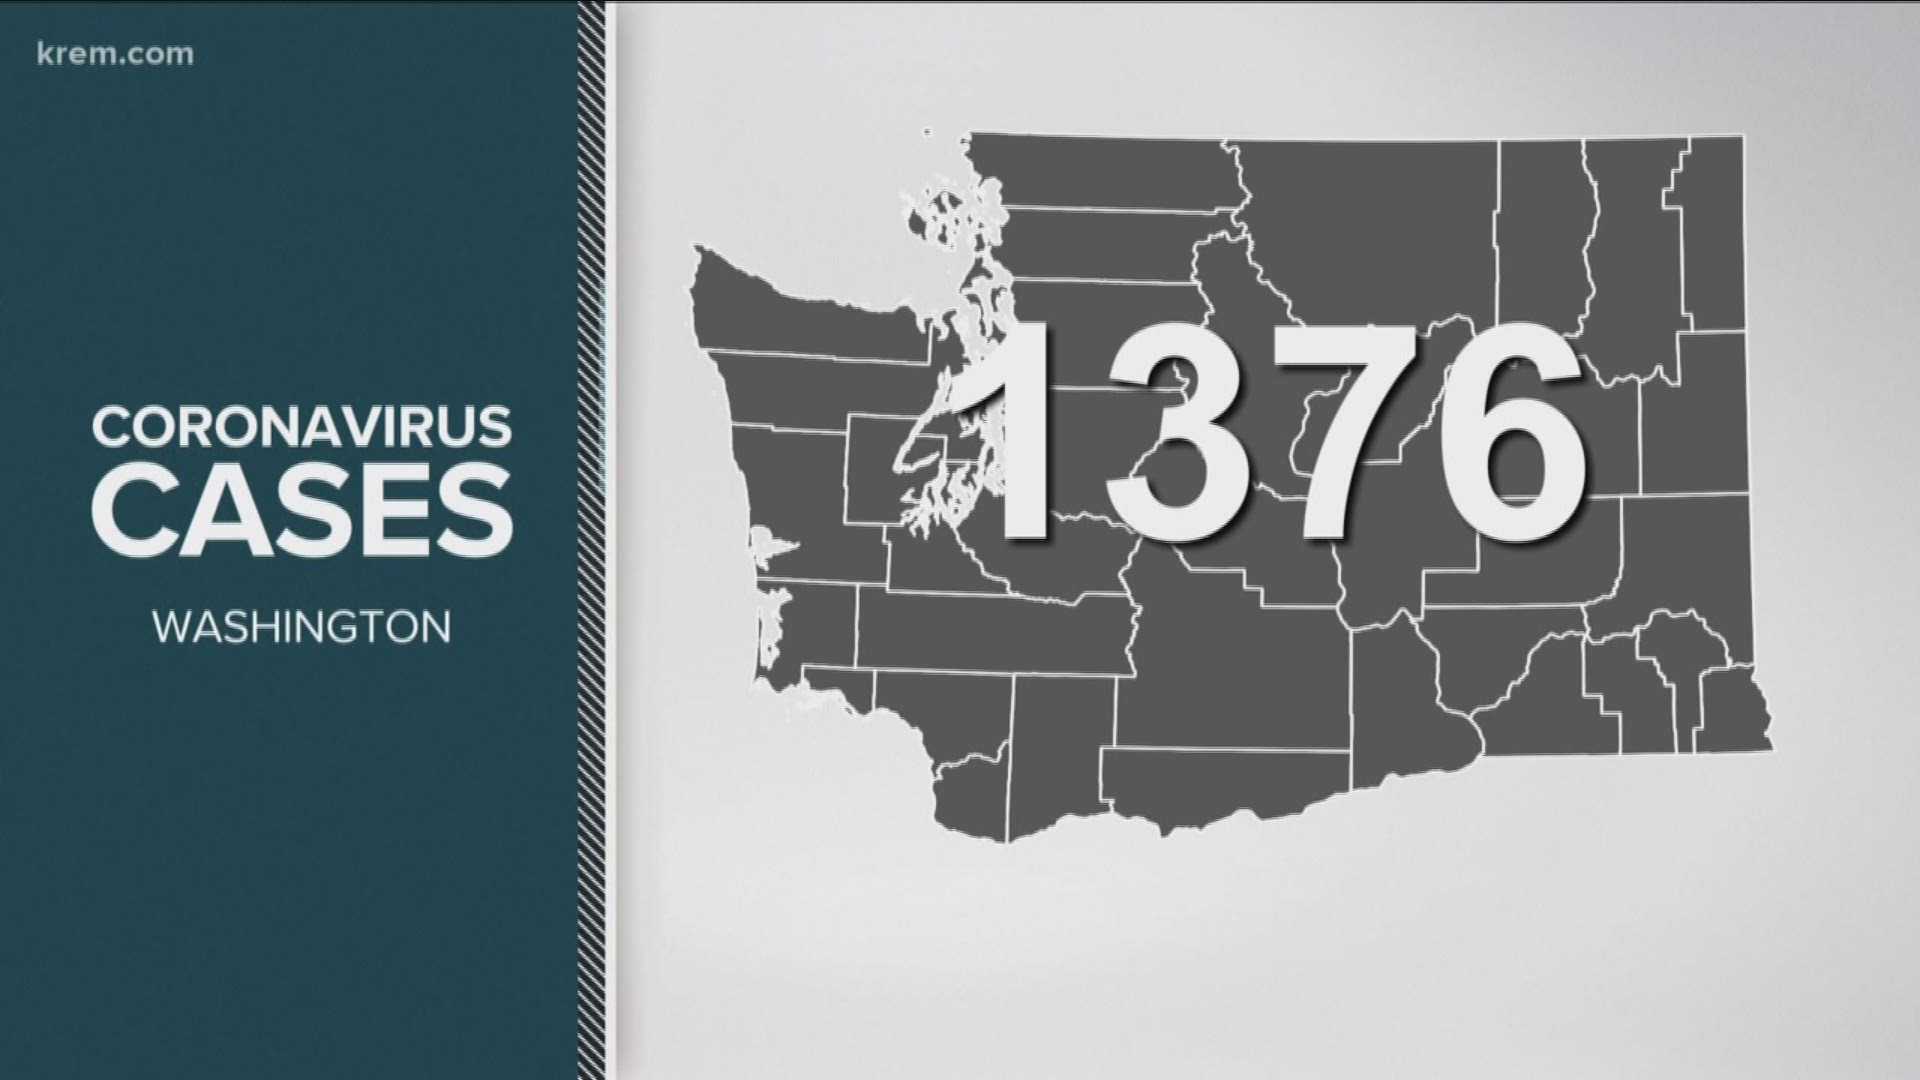 These are the latest coronavirus numbers in Washington and Idaho on March 19, 2020.